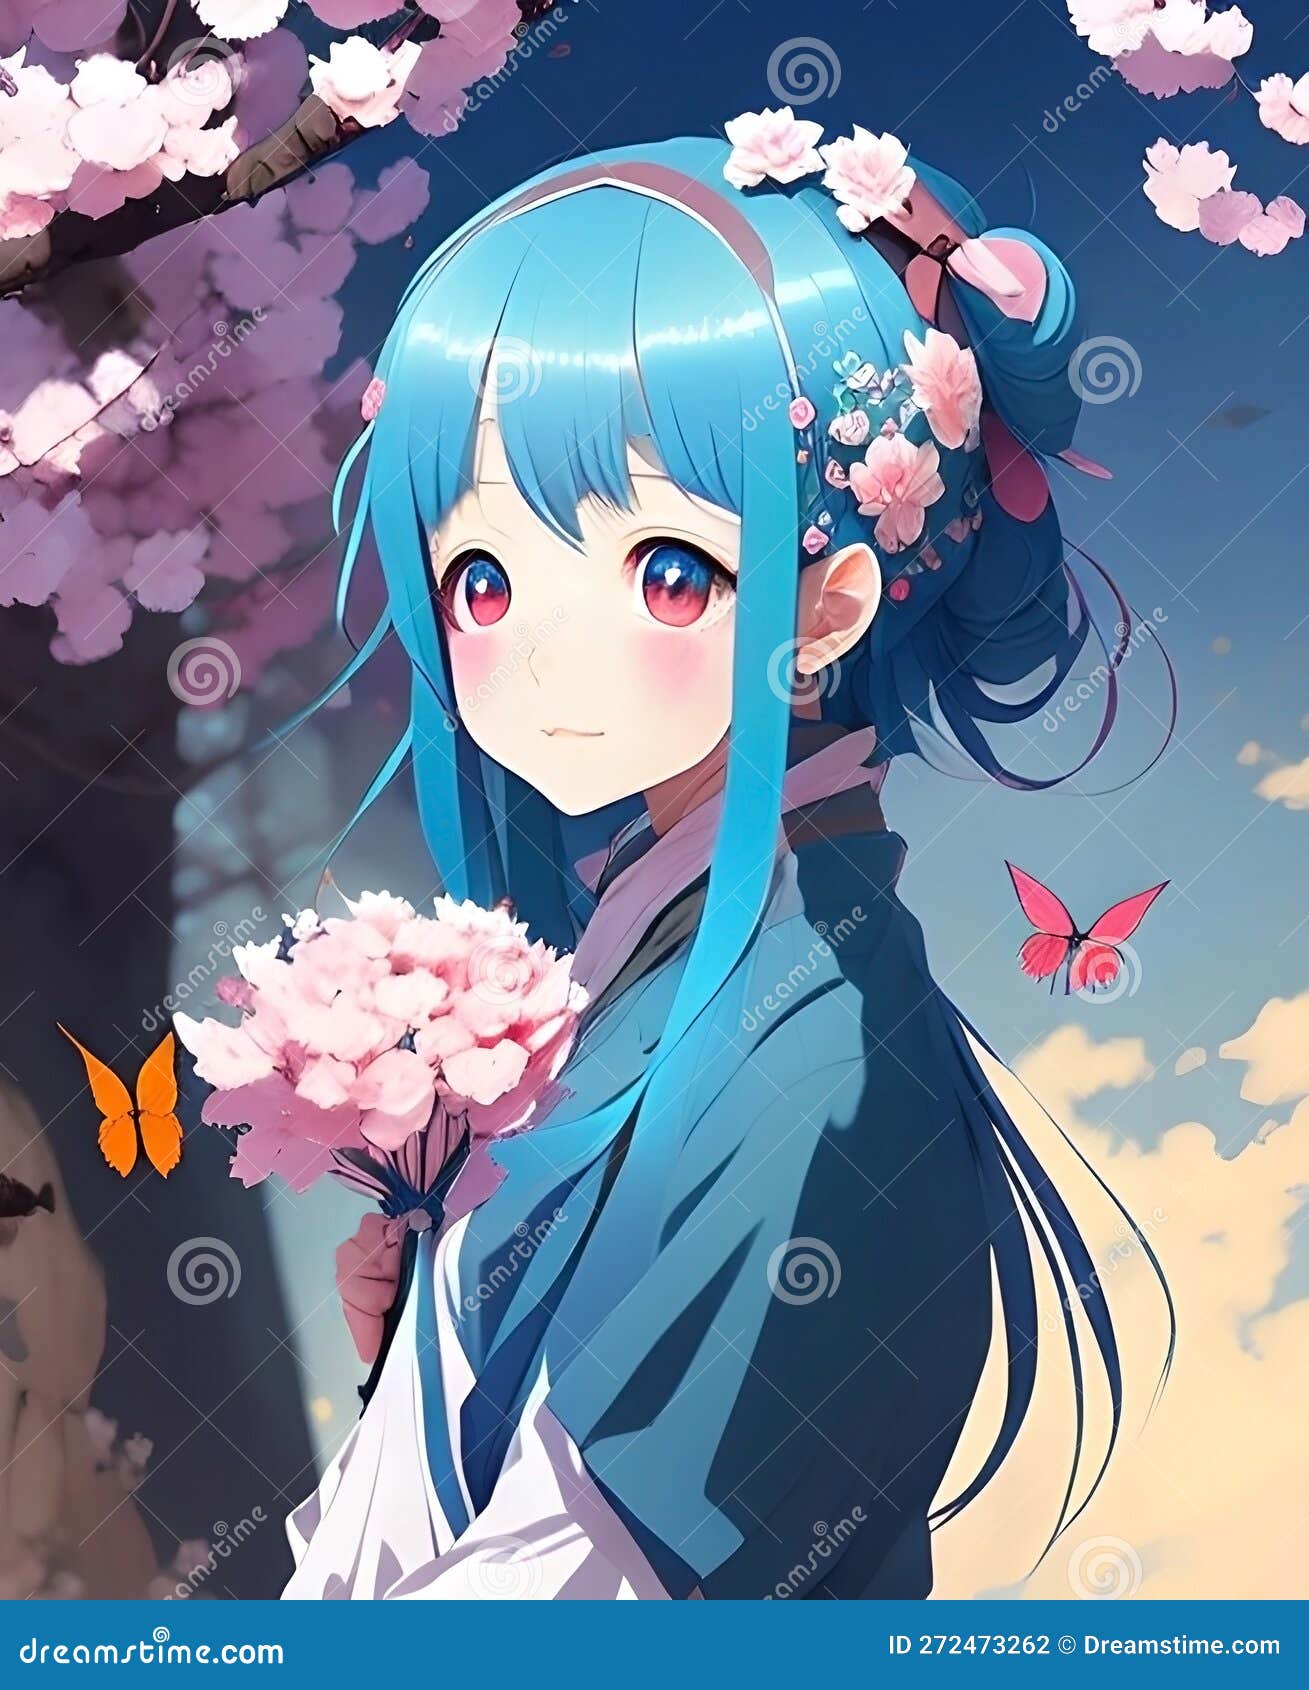 What is the personality type of blue haired anime characters? - Quora